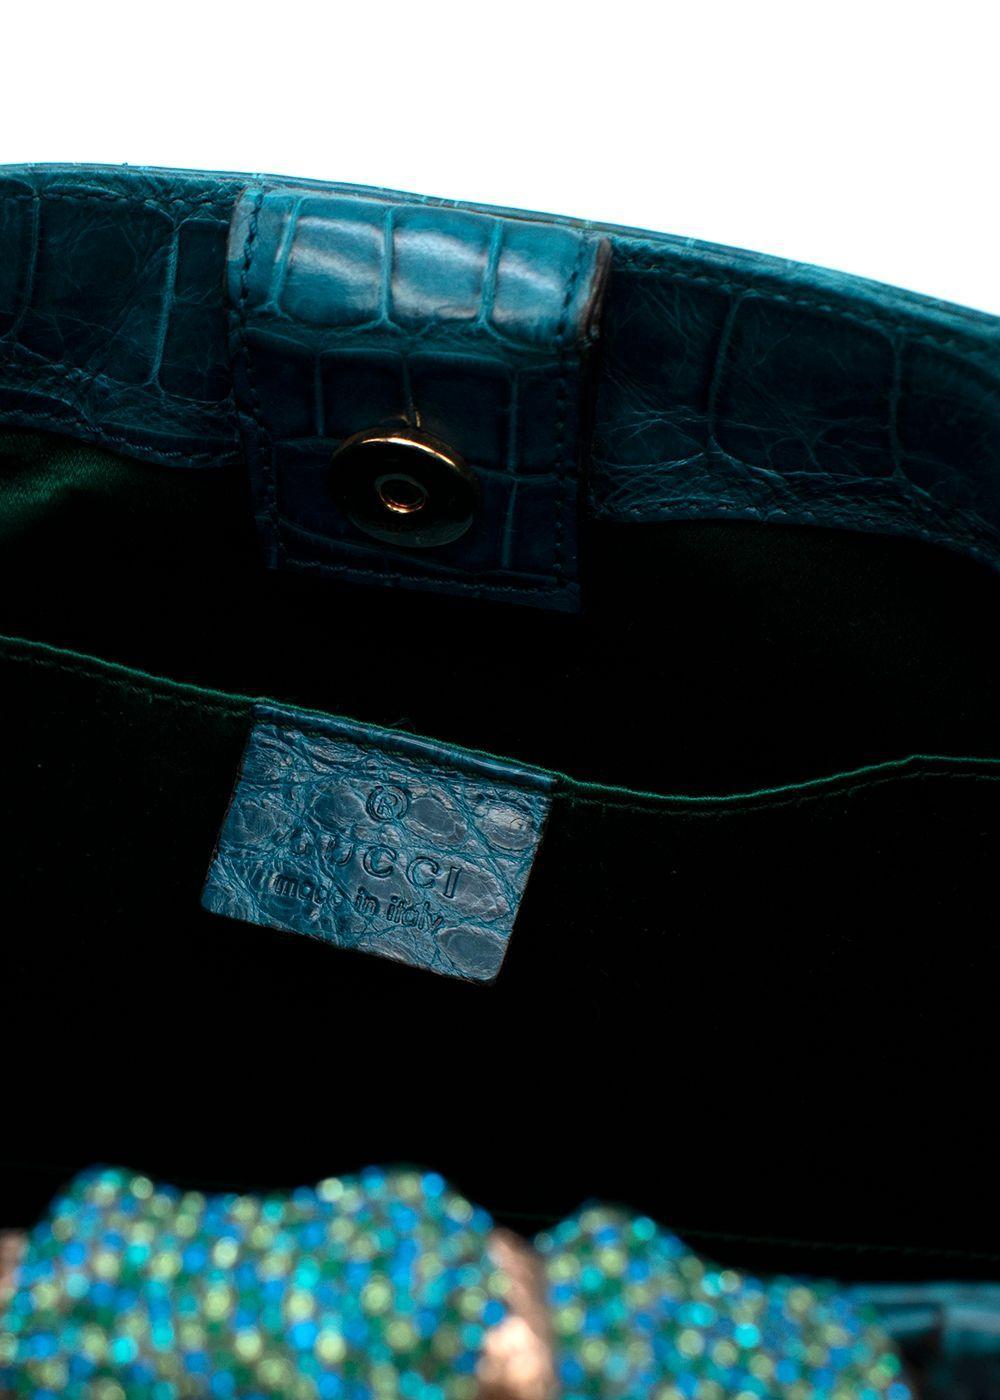 2004 Vintage Iconic Tom Ford for Gucci teal crocodile bag 8